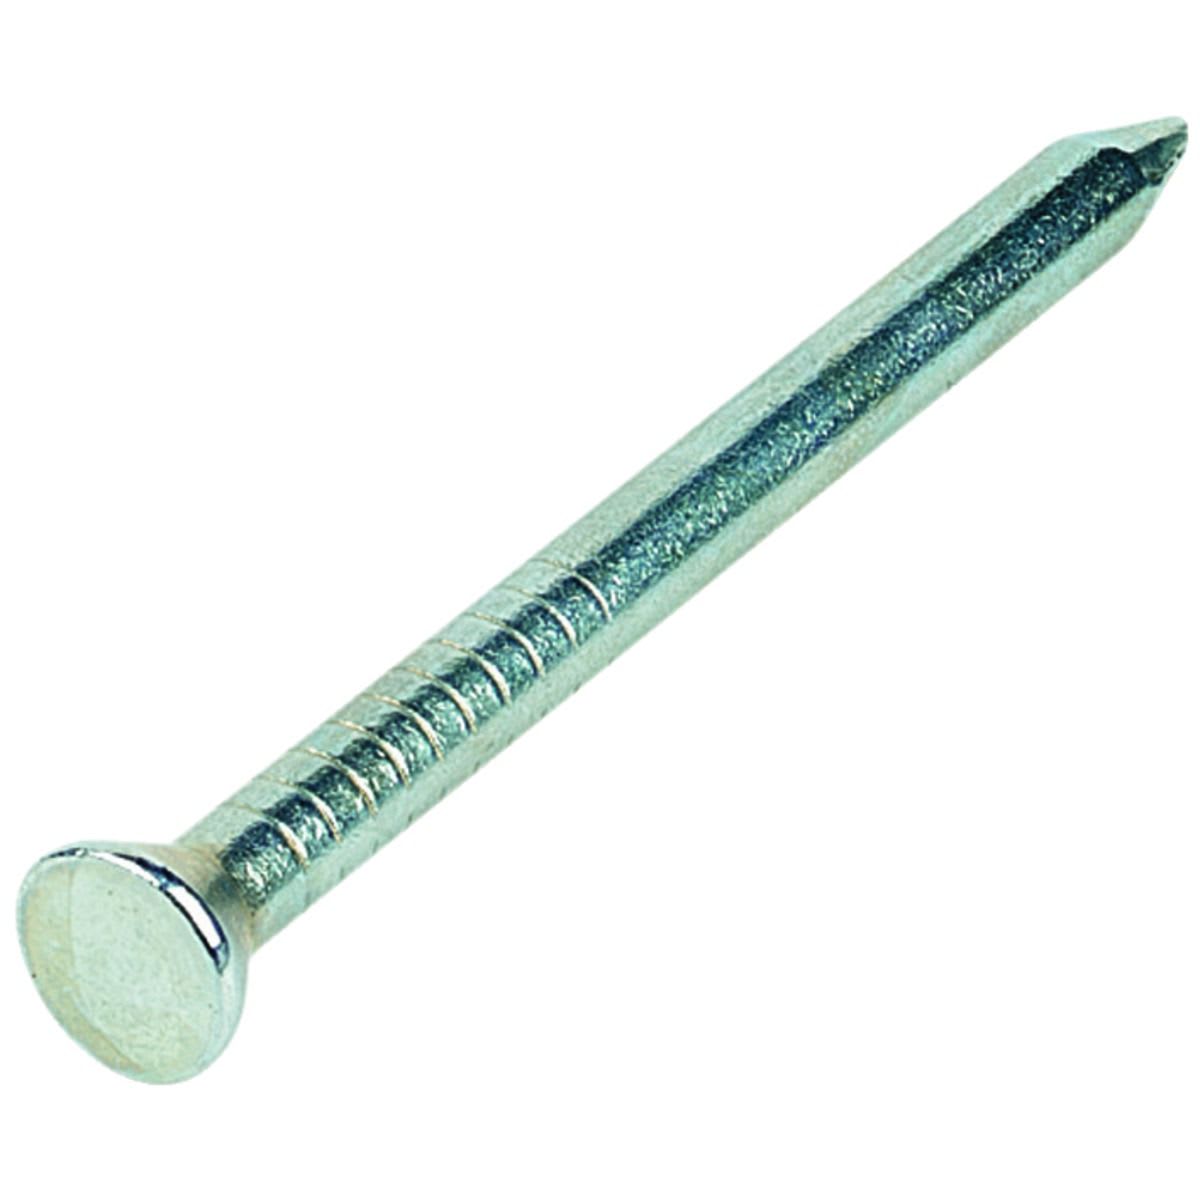 Wickes 30mm Countersunk Head Masonry Nails - Pack